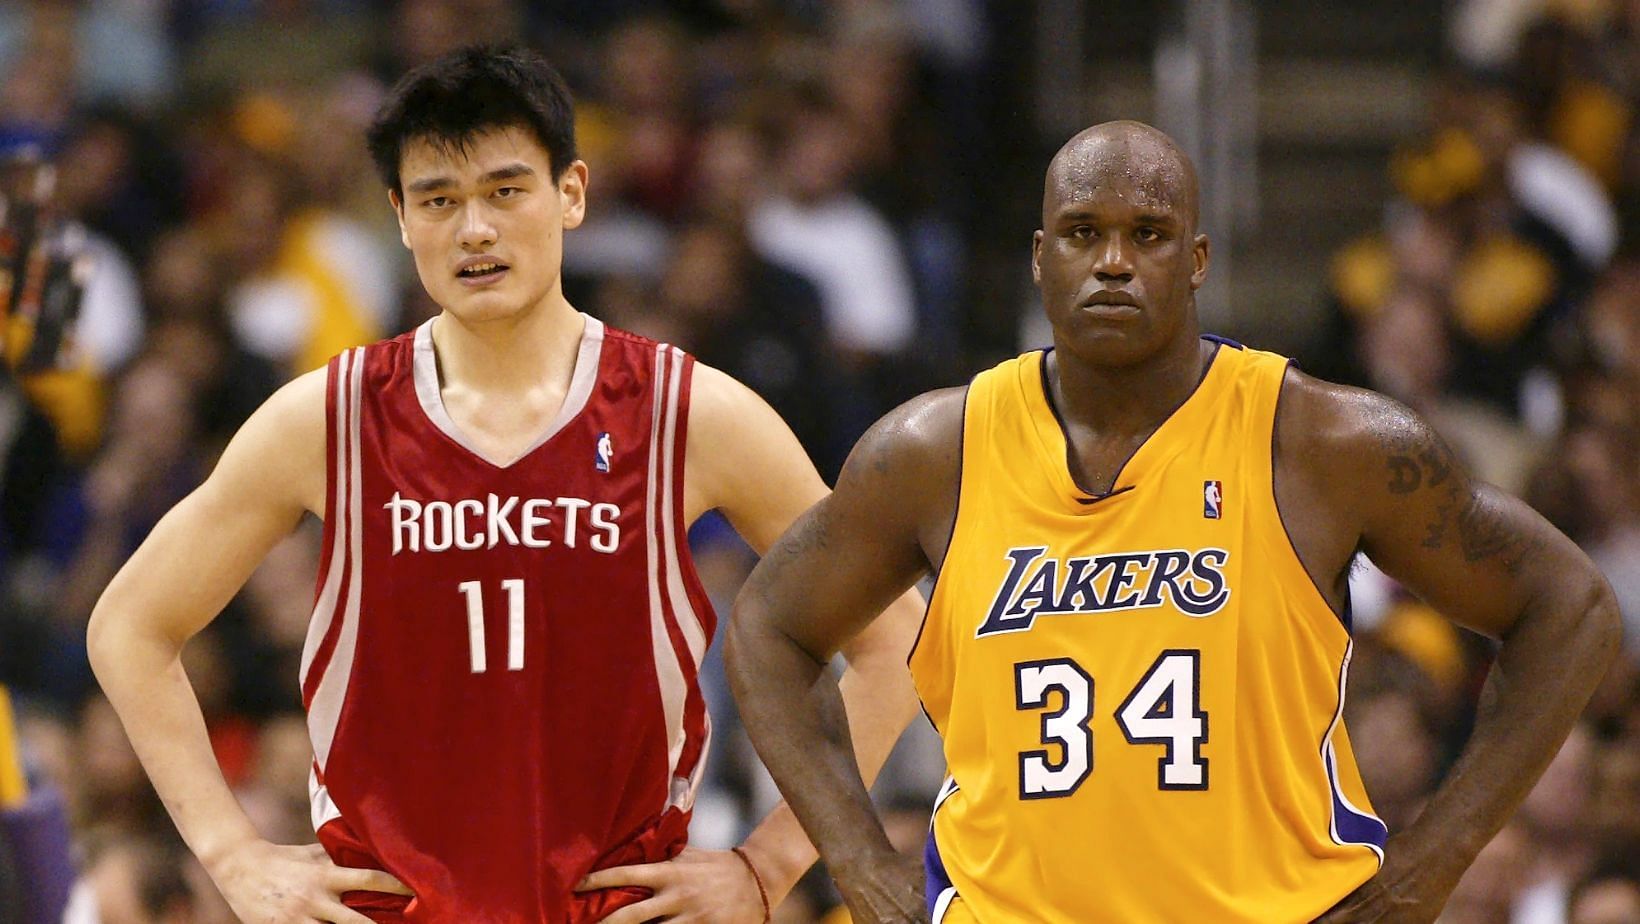 The 7-foot-6 Yao Ming [L] was taller than most NBA players during his time.